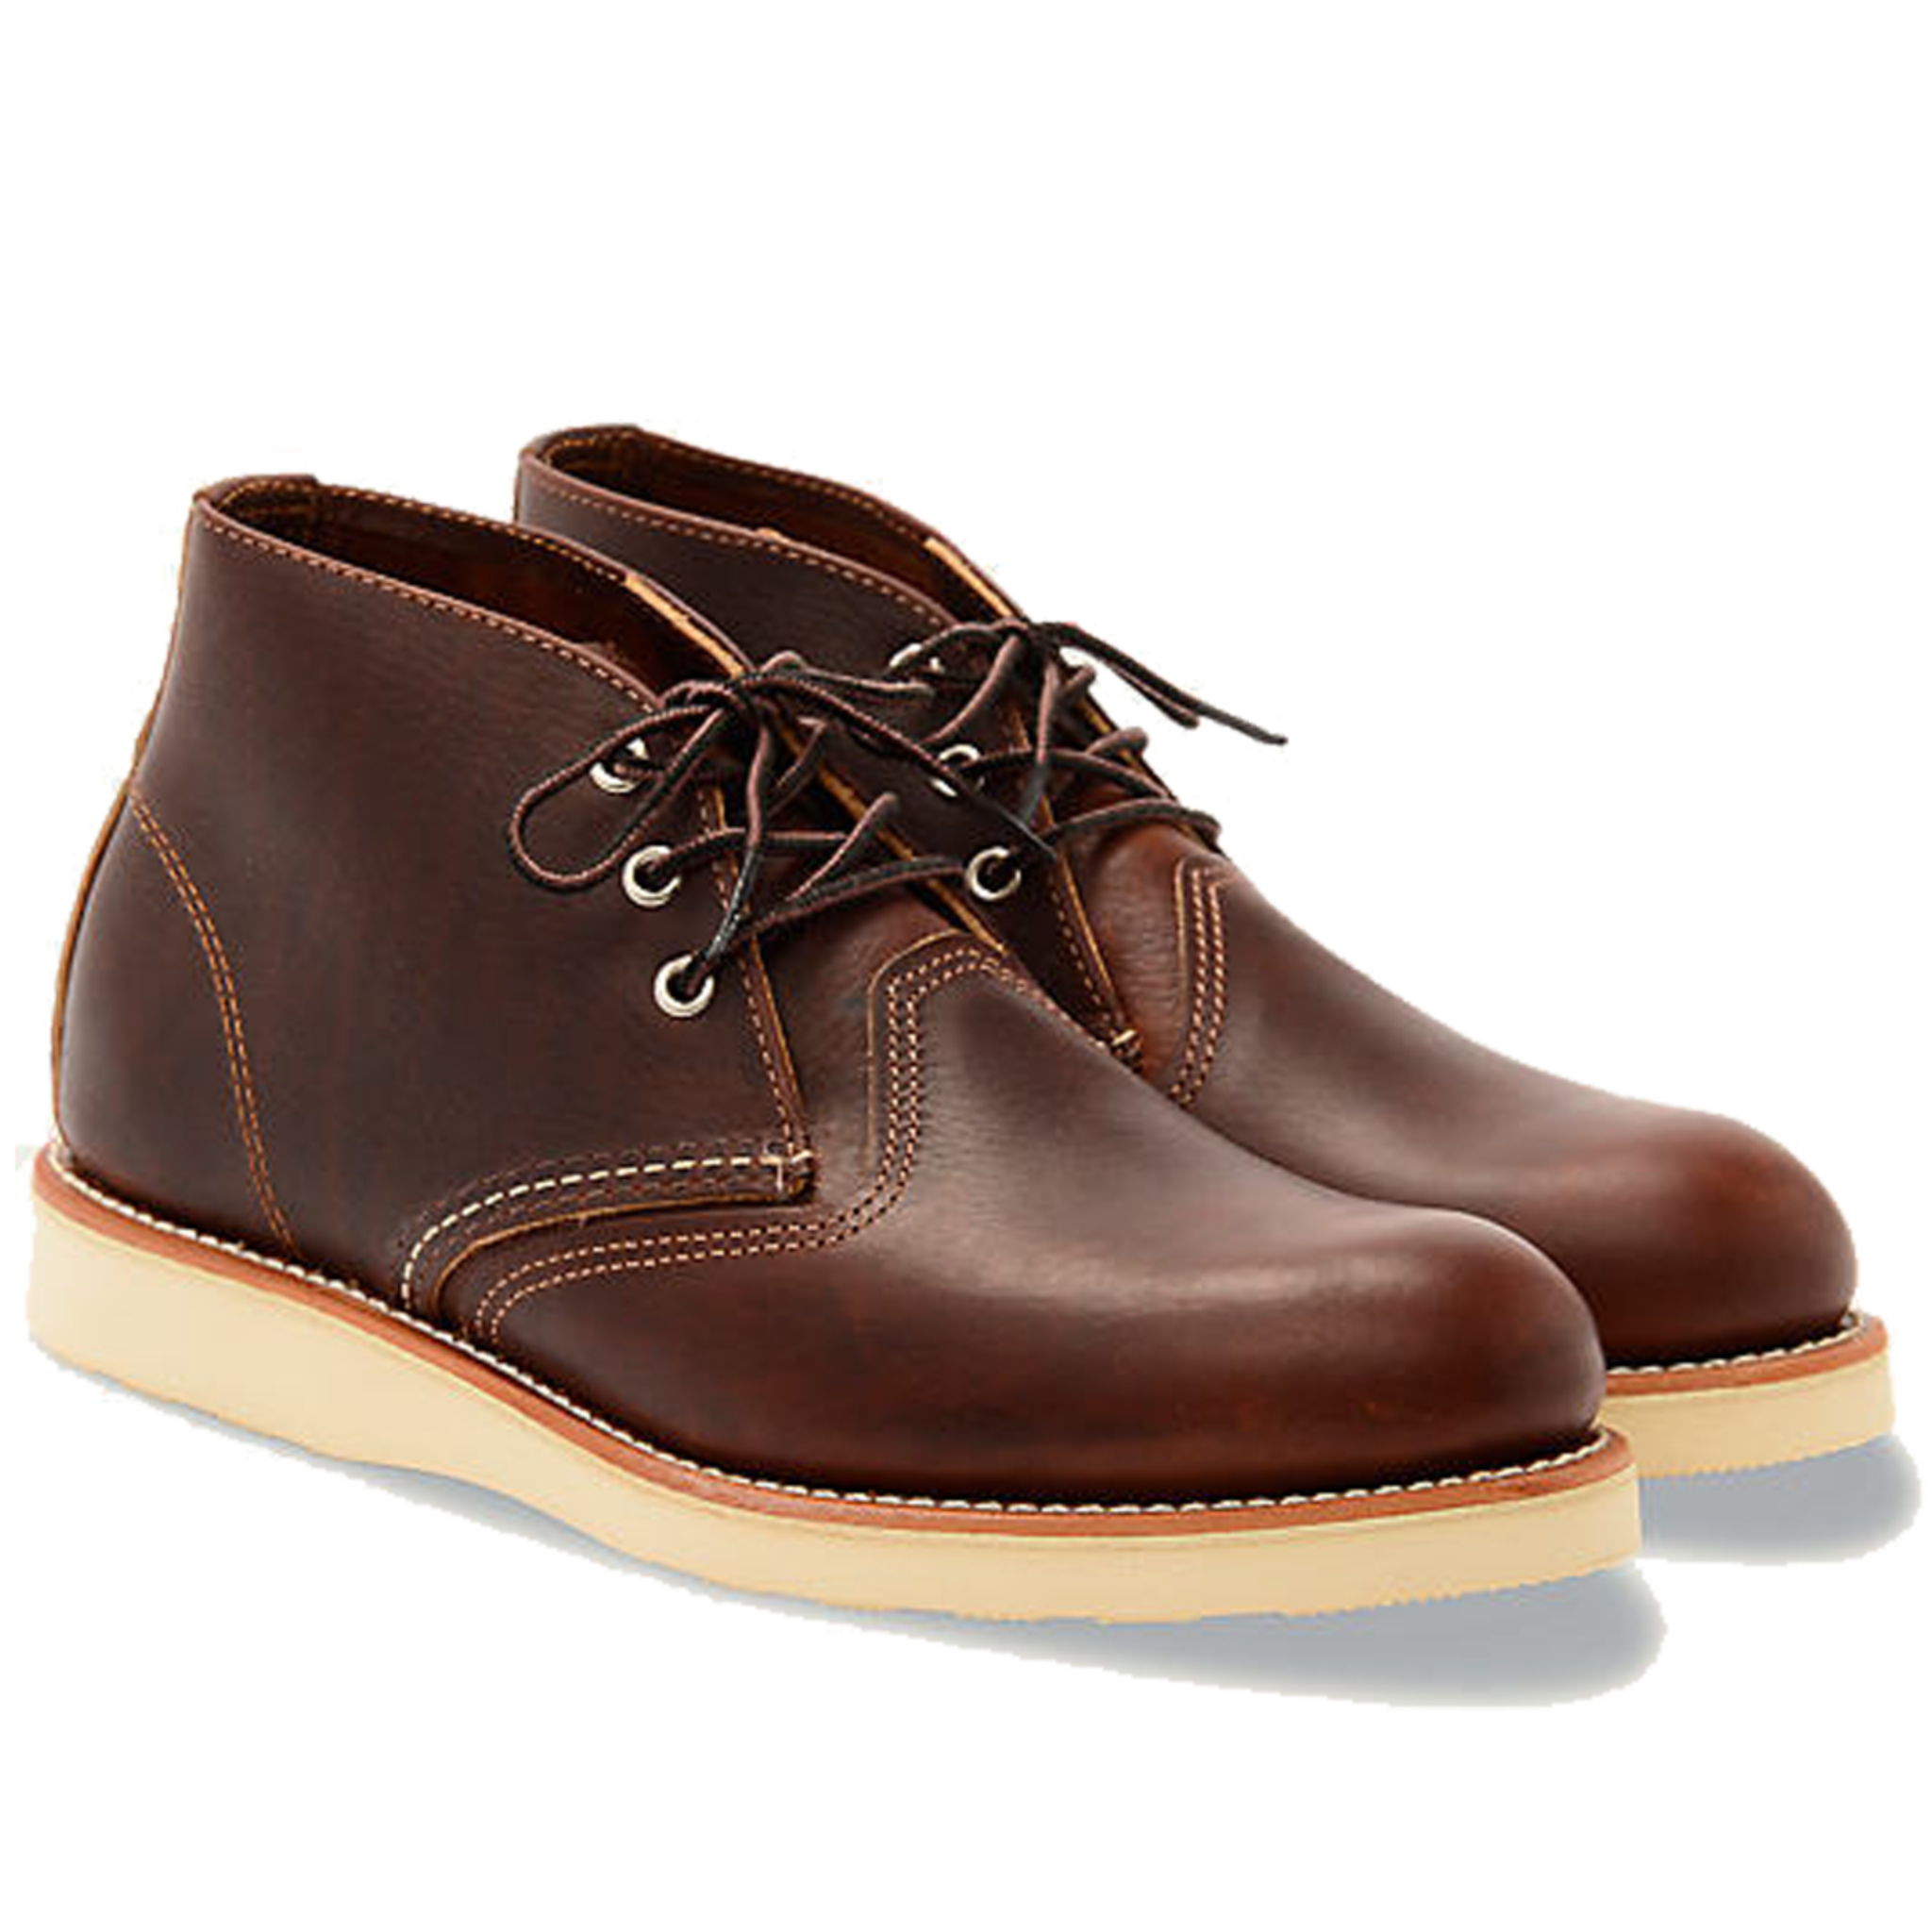 Red Wing Shoes | Purpose Built Footwear | Work Boots – Gunthers 